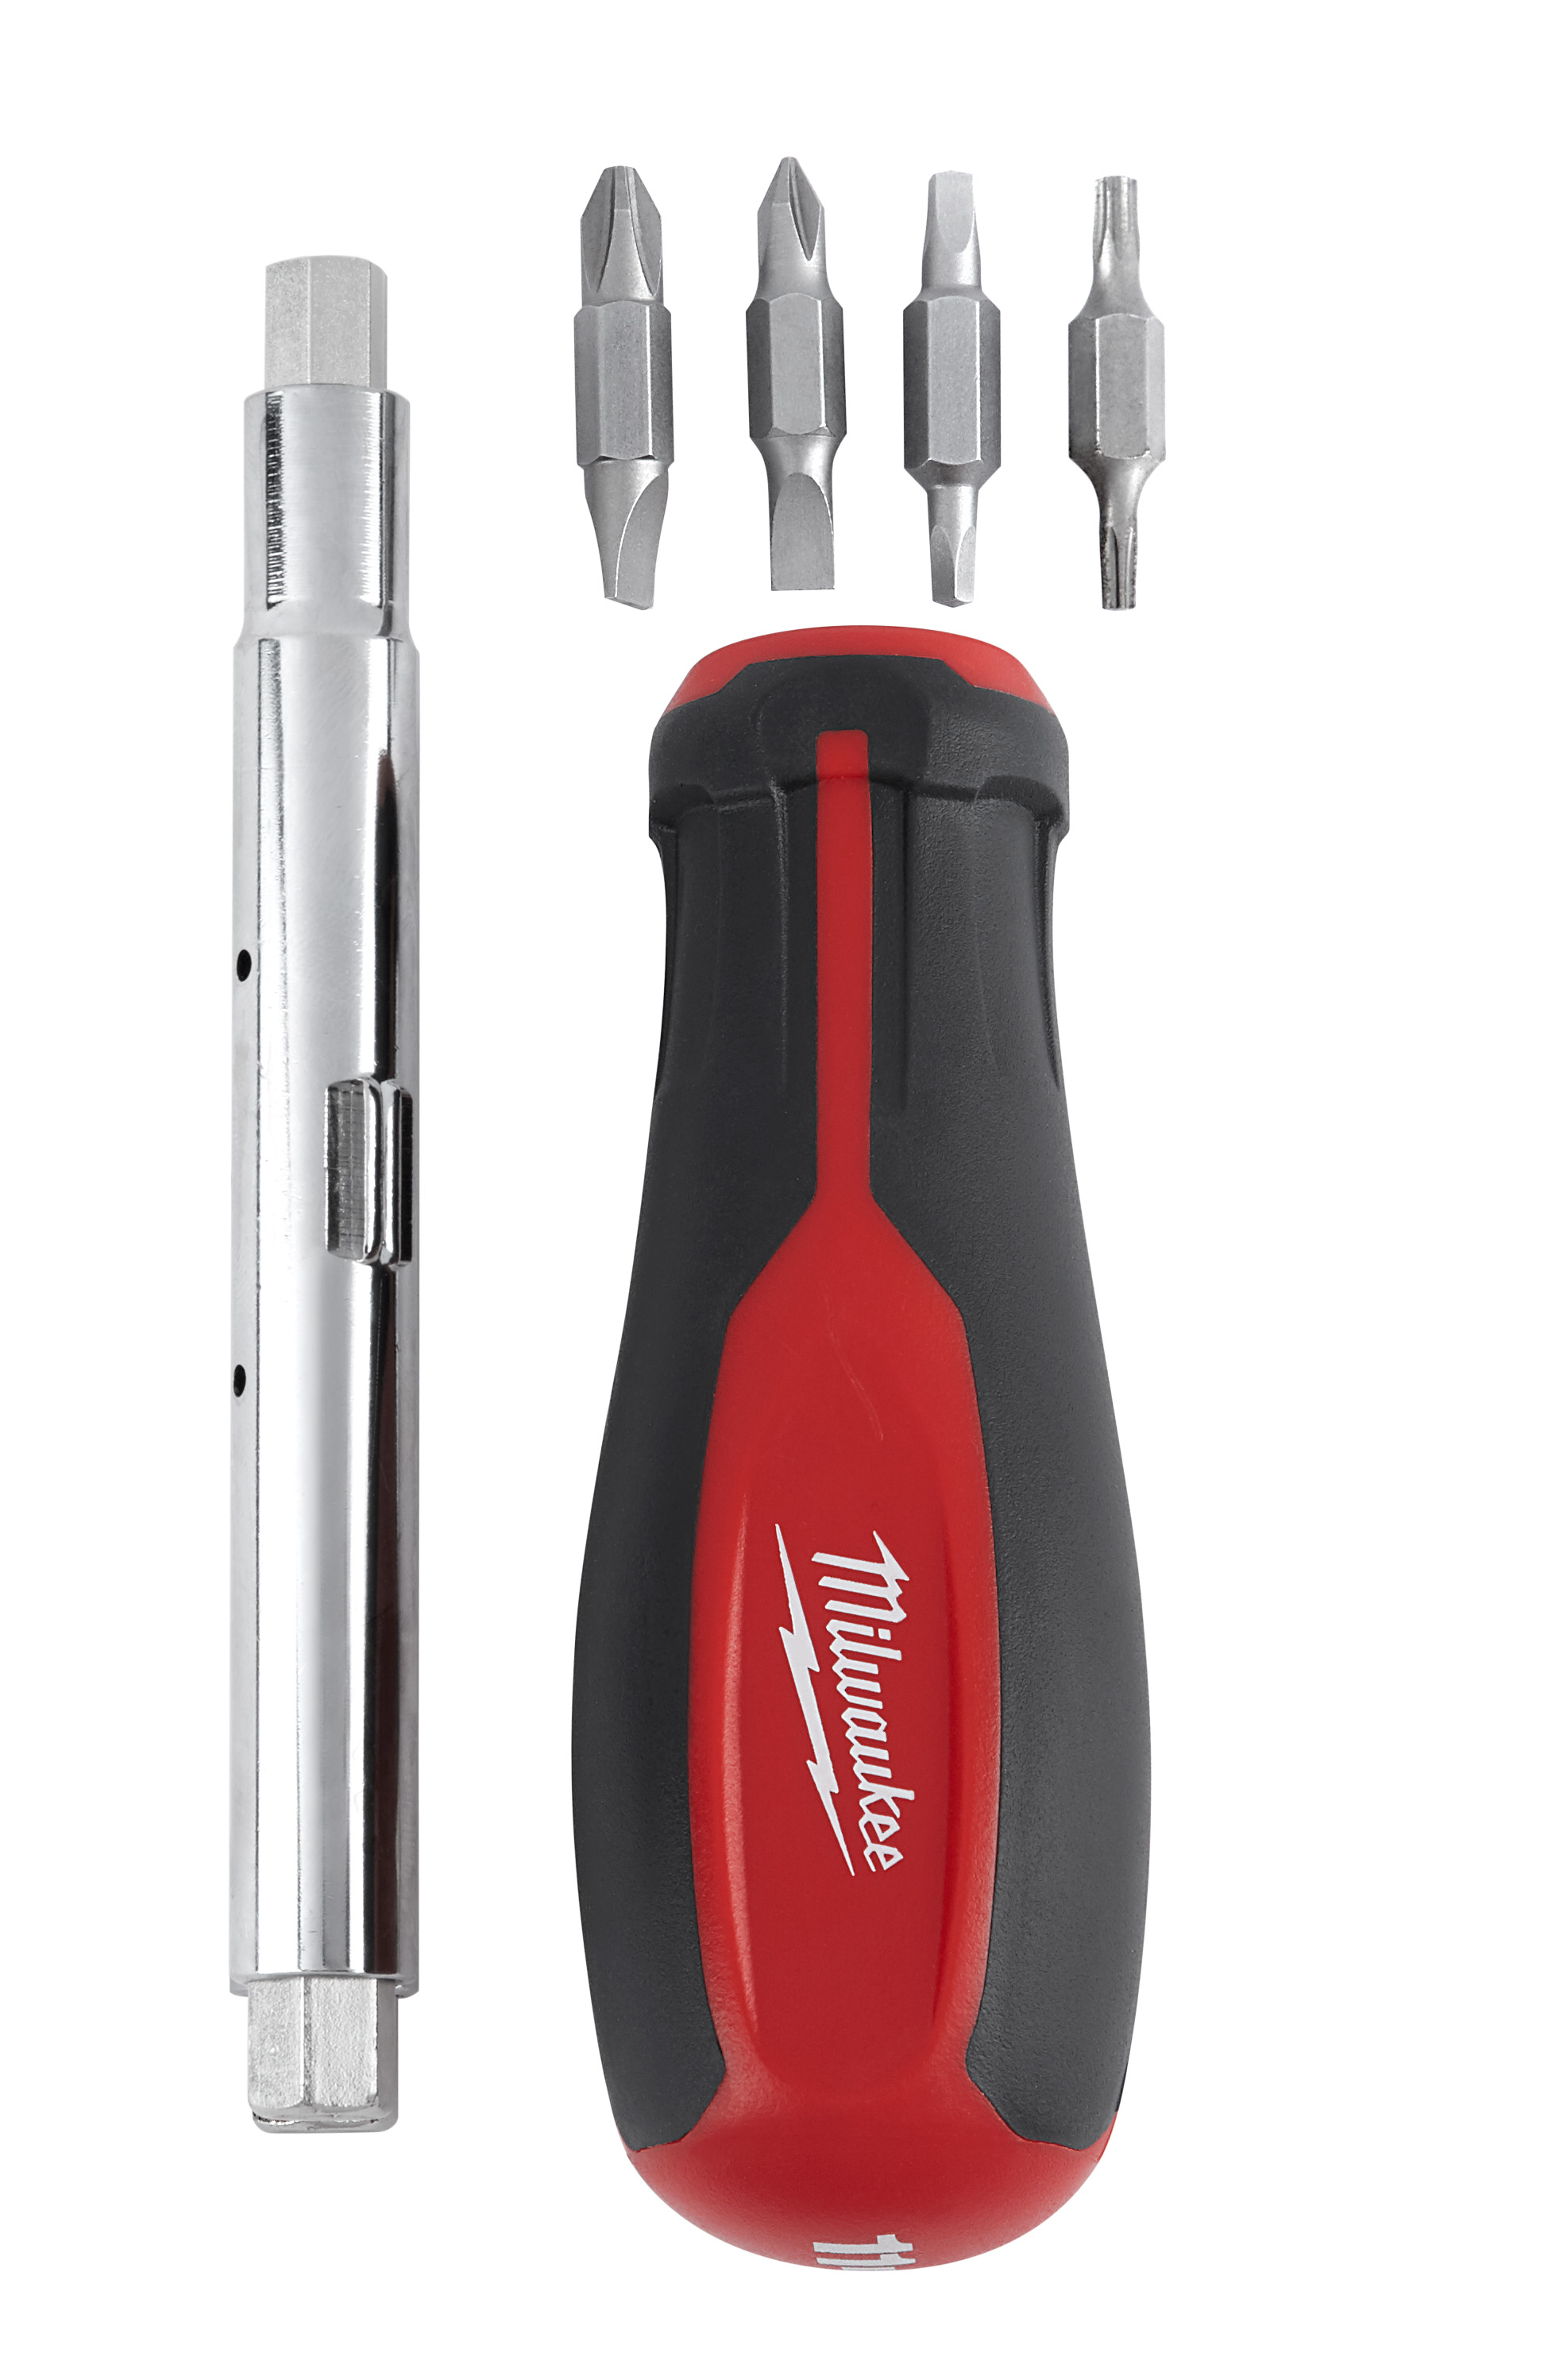 The 11-in-1 screwdriver includes the 8 bits and 3 nut drivers most requested by professionals. The bit prevents bit wear from hardened screws and extends bit life when fastening specialty screws found in electrical boxes, conduit couplers, outlets, and other common job site fixtures.